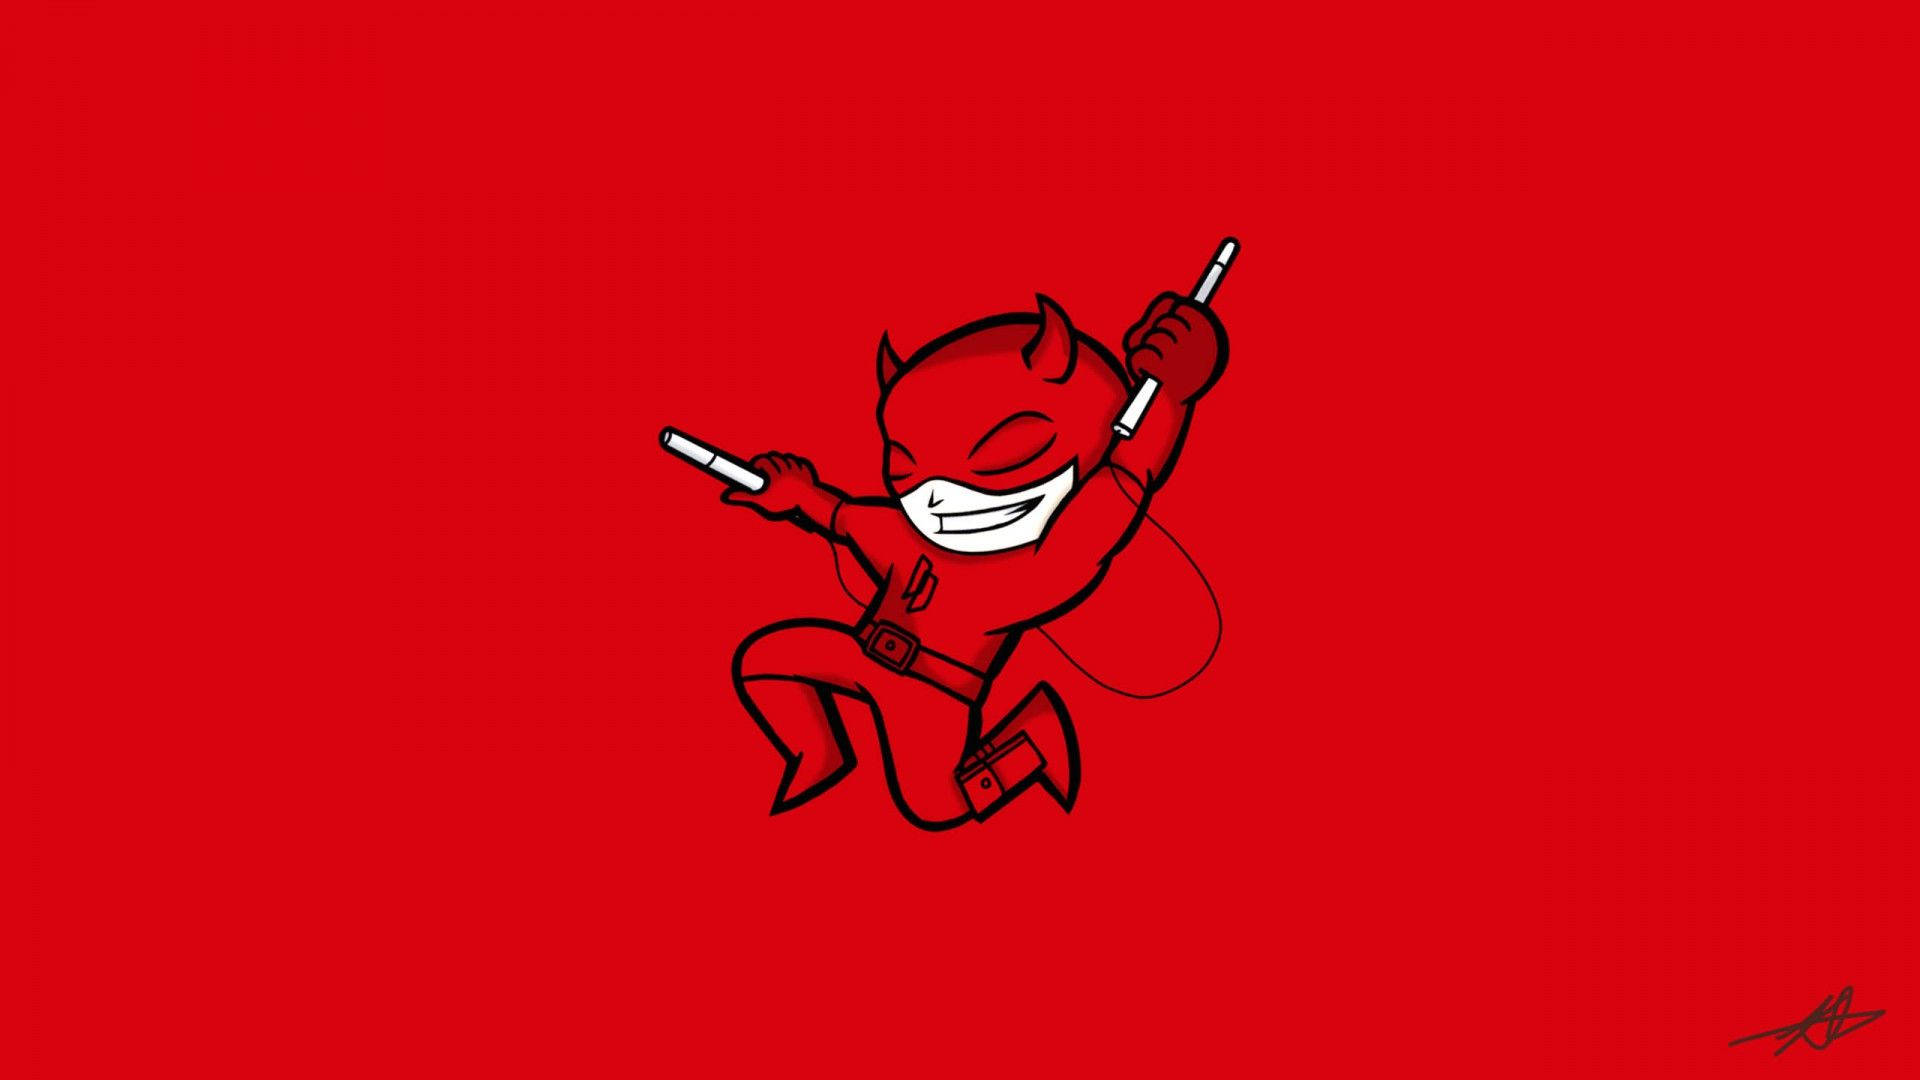 Adorable Animated Image Of Daredevil